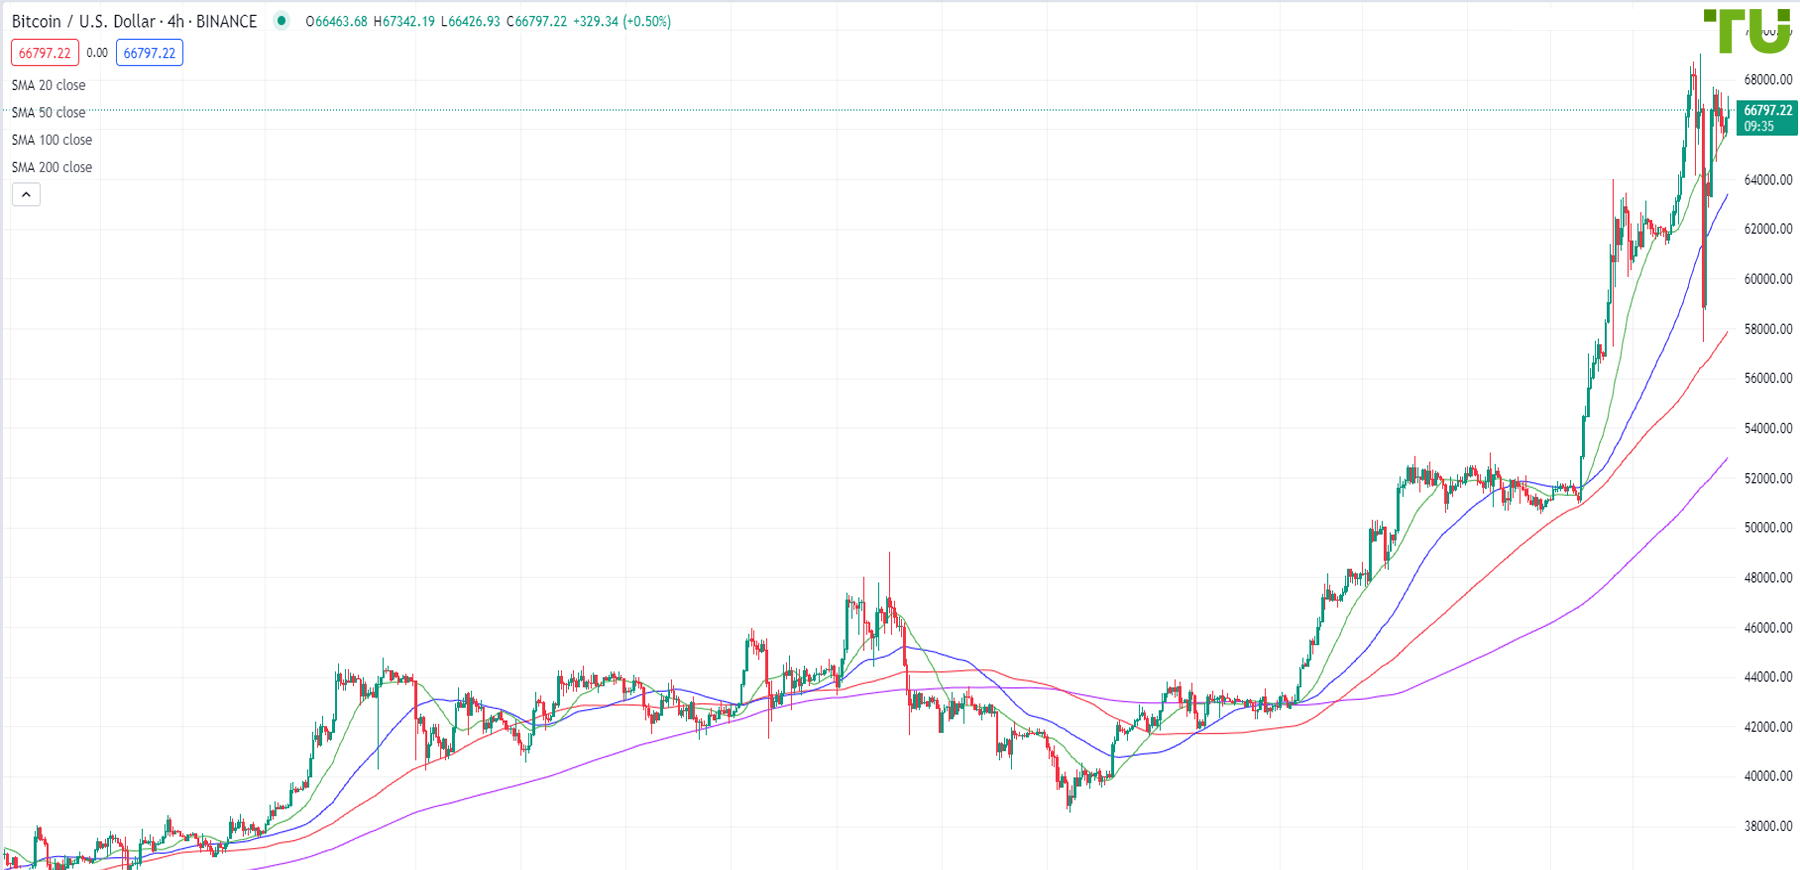 BTC/USD redeemed on the fall to 57520